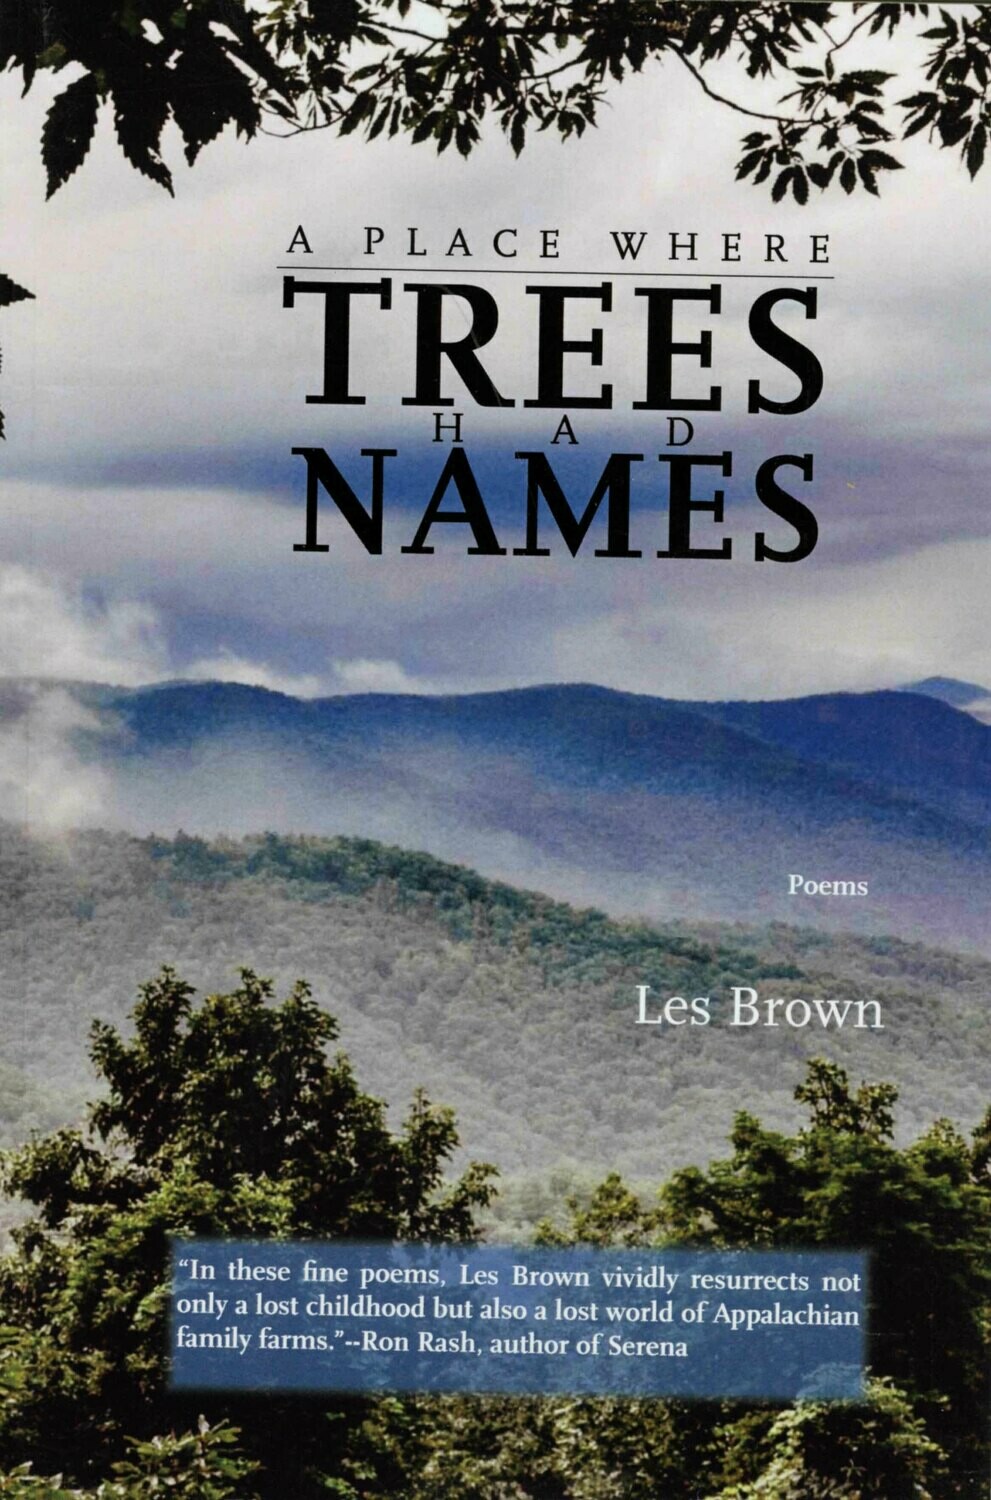 A Place Where Trees Had Names